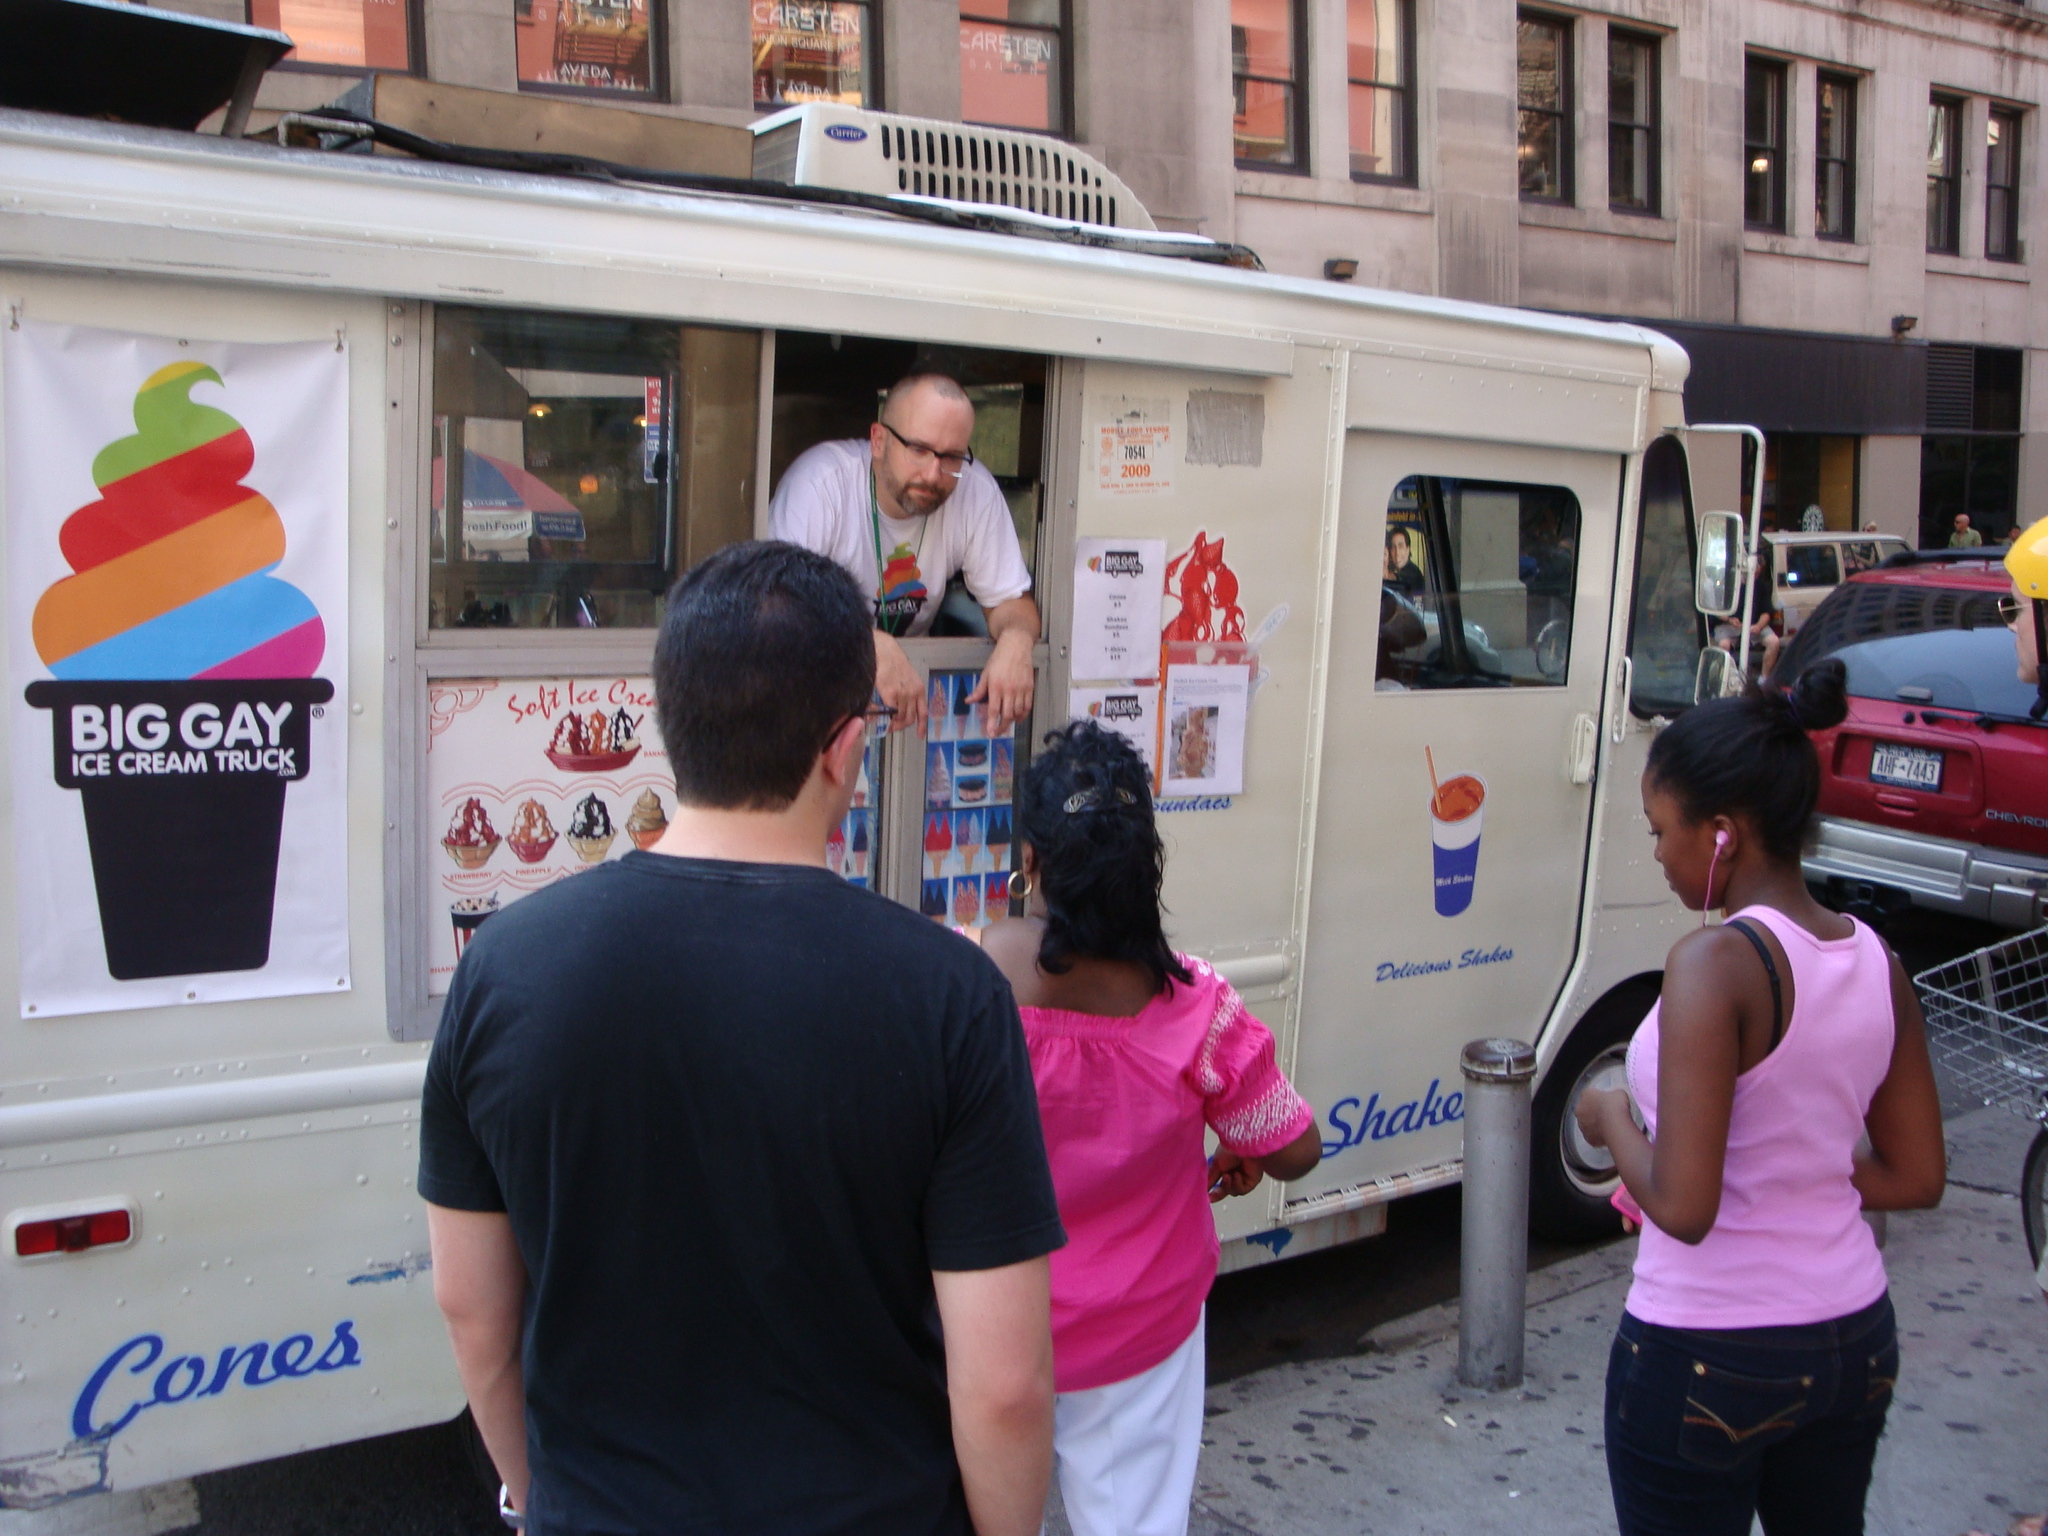 A man, Doug Quint, hangs out the window of a soft serve truck with the branding Big Gay Ice Cream.